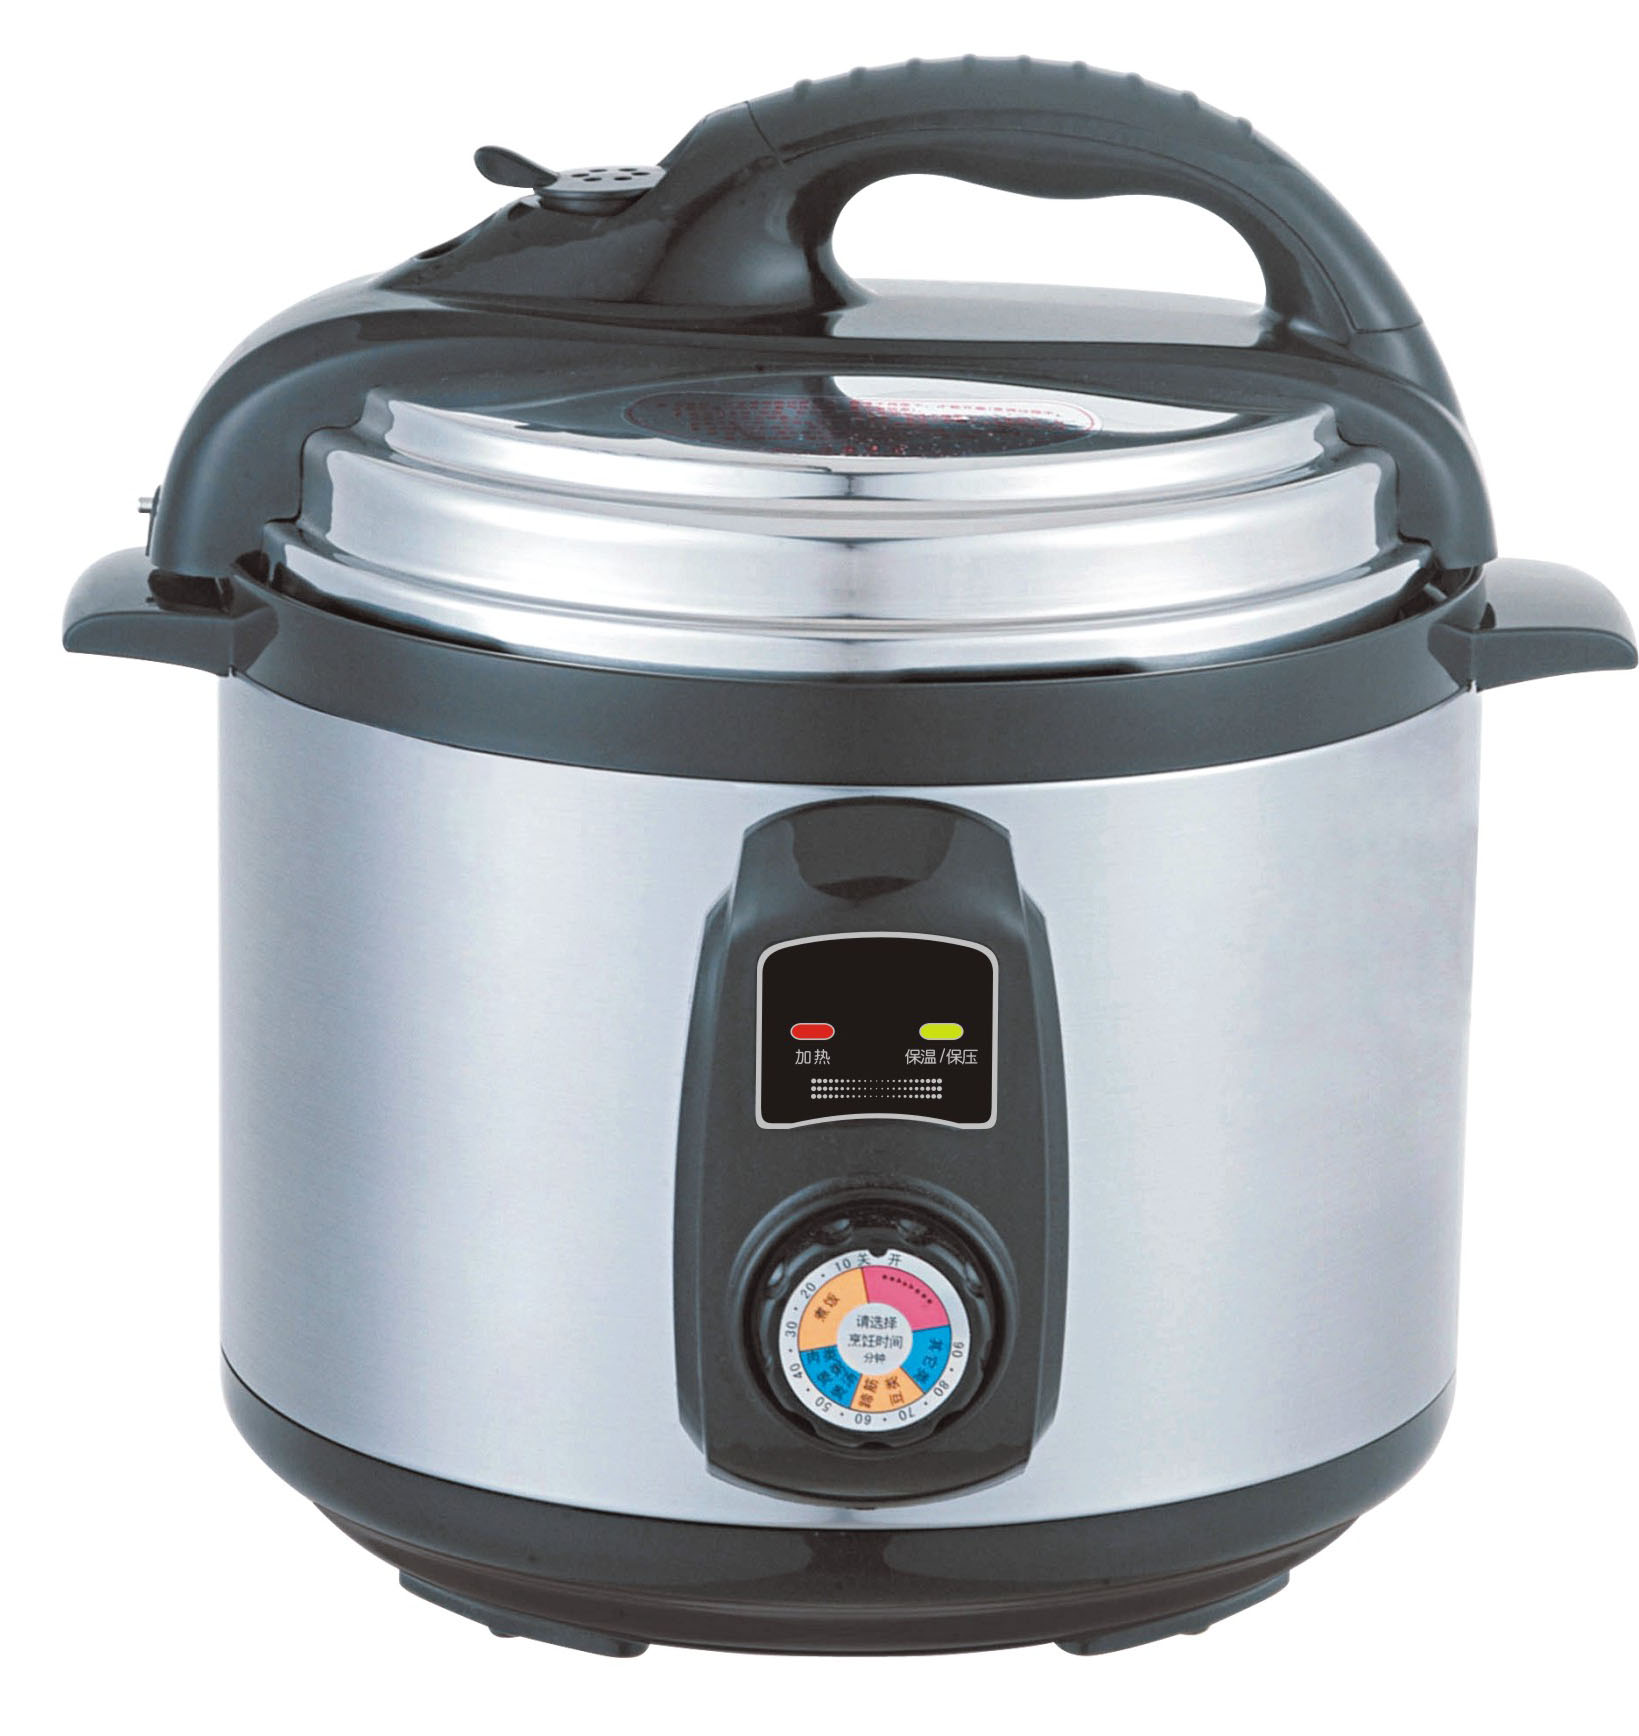 4L/5L/6L High quality stainless steel electric pressure cookers 